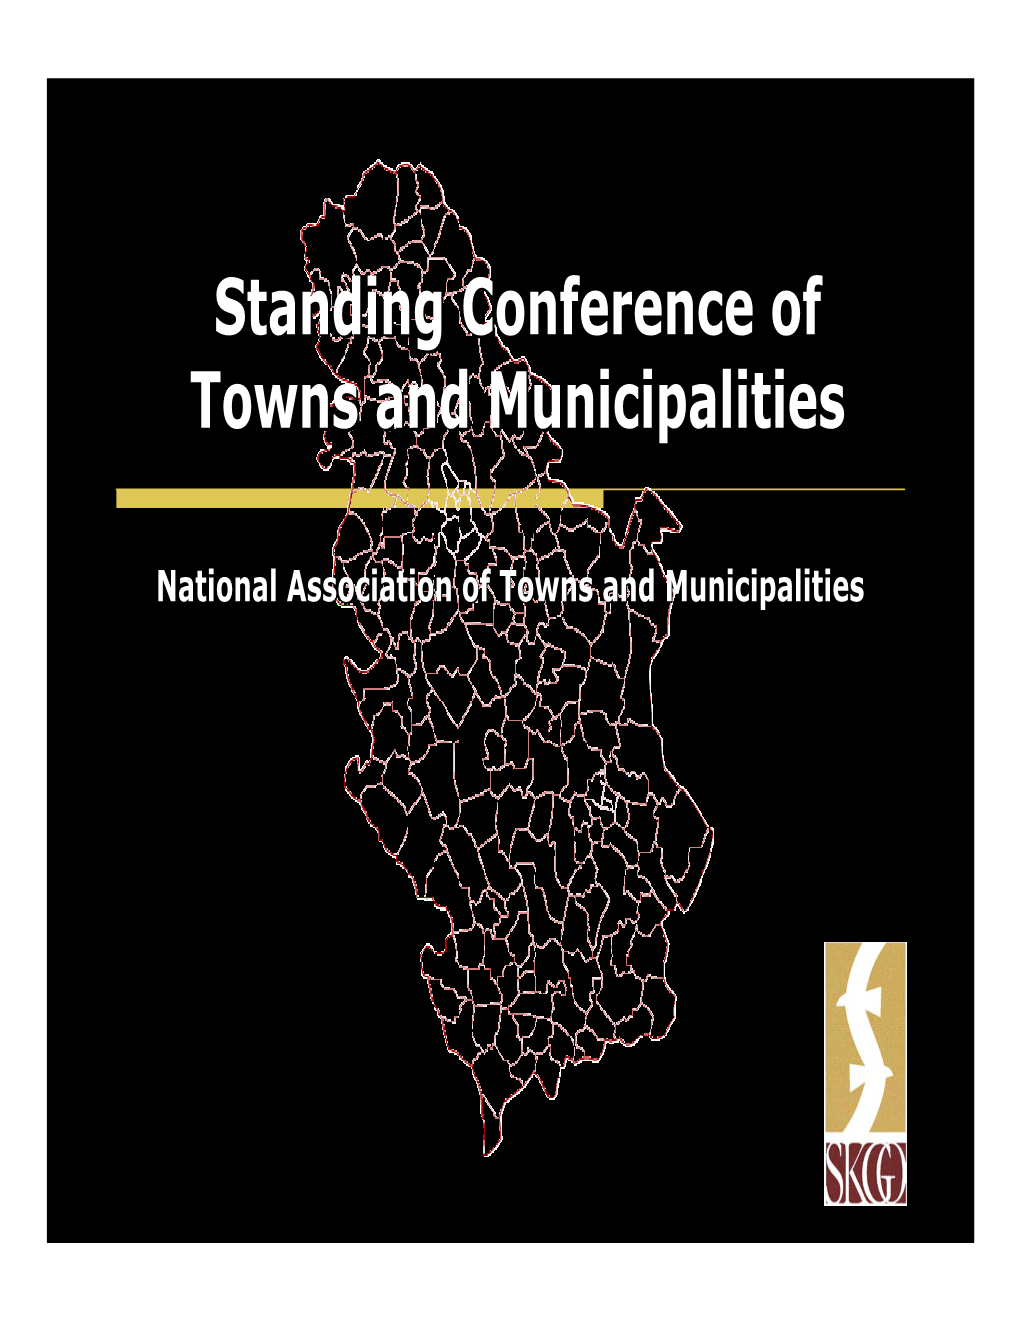 Standing Conference of Towns and Municipalities